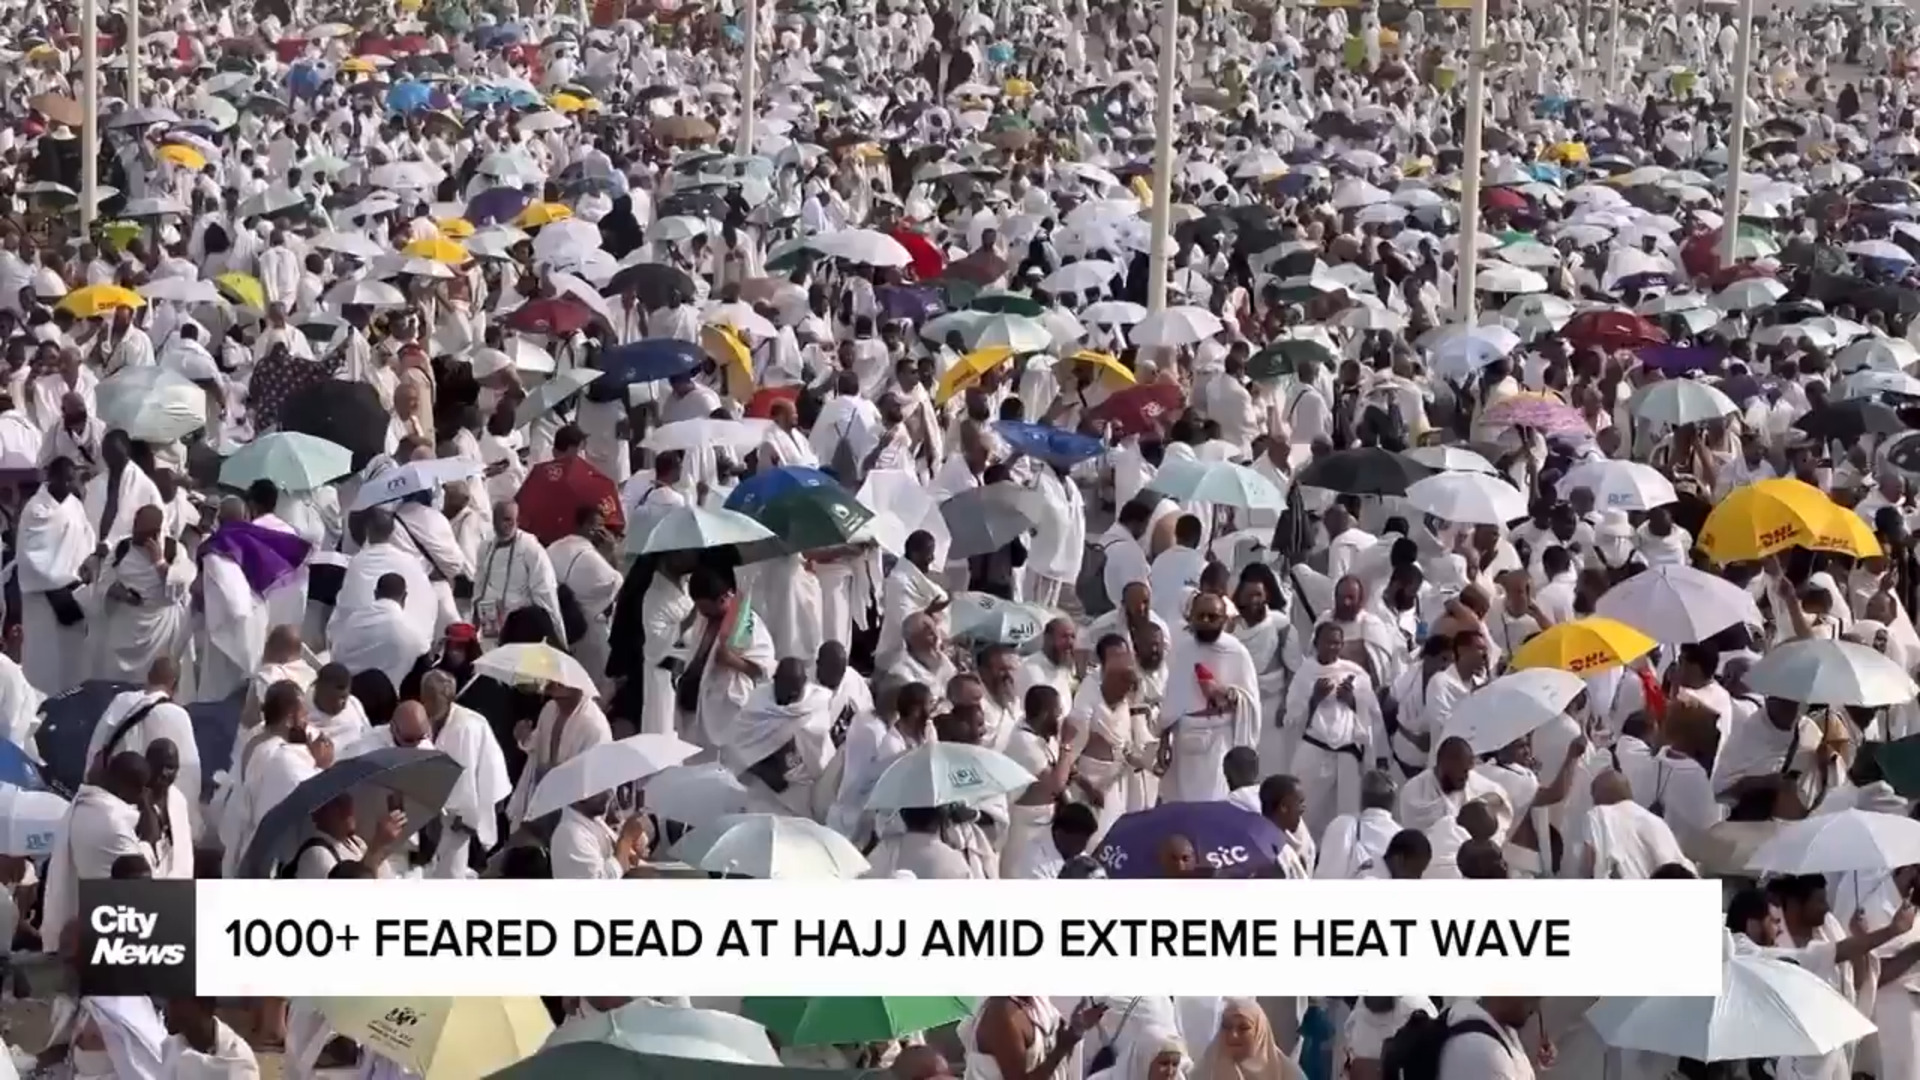 More than 1000 people feared dead at Hajj amid extreme heat wave